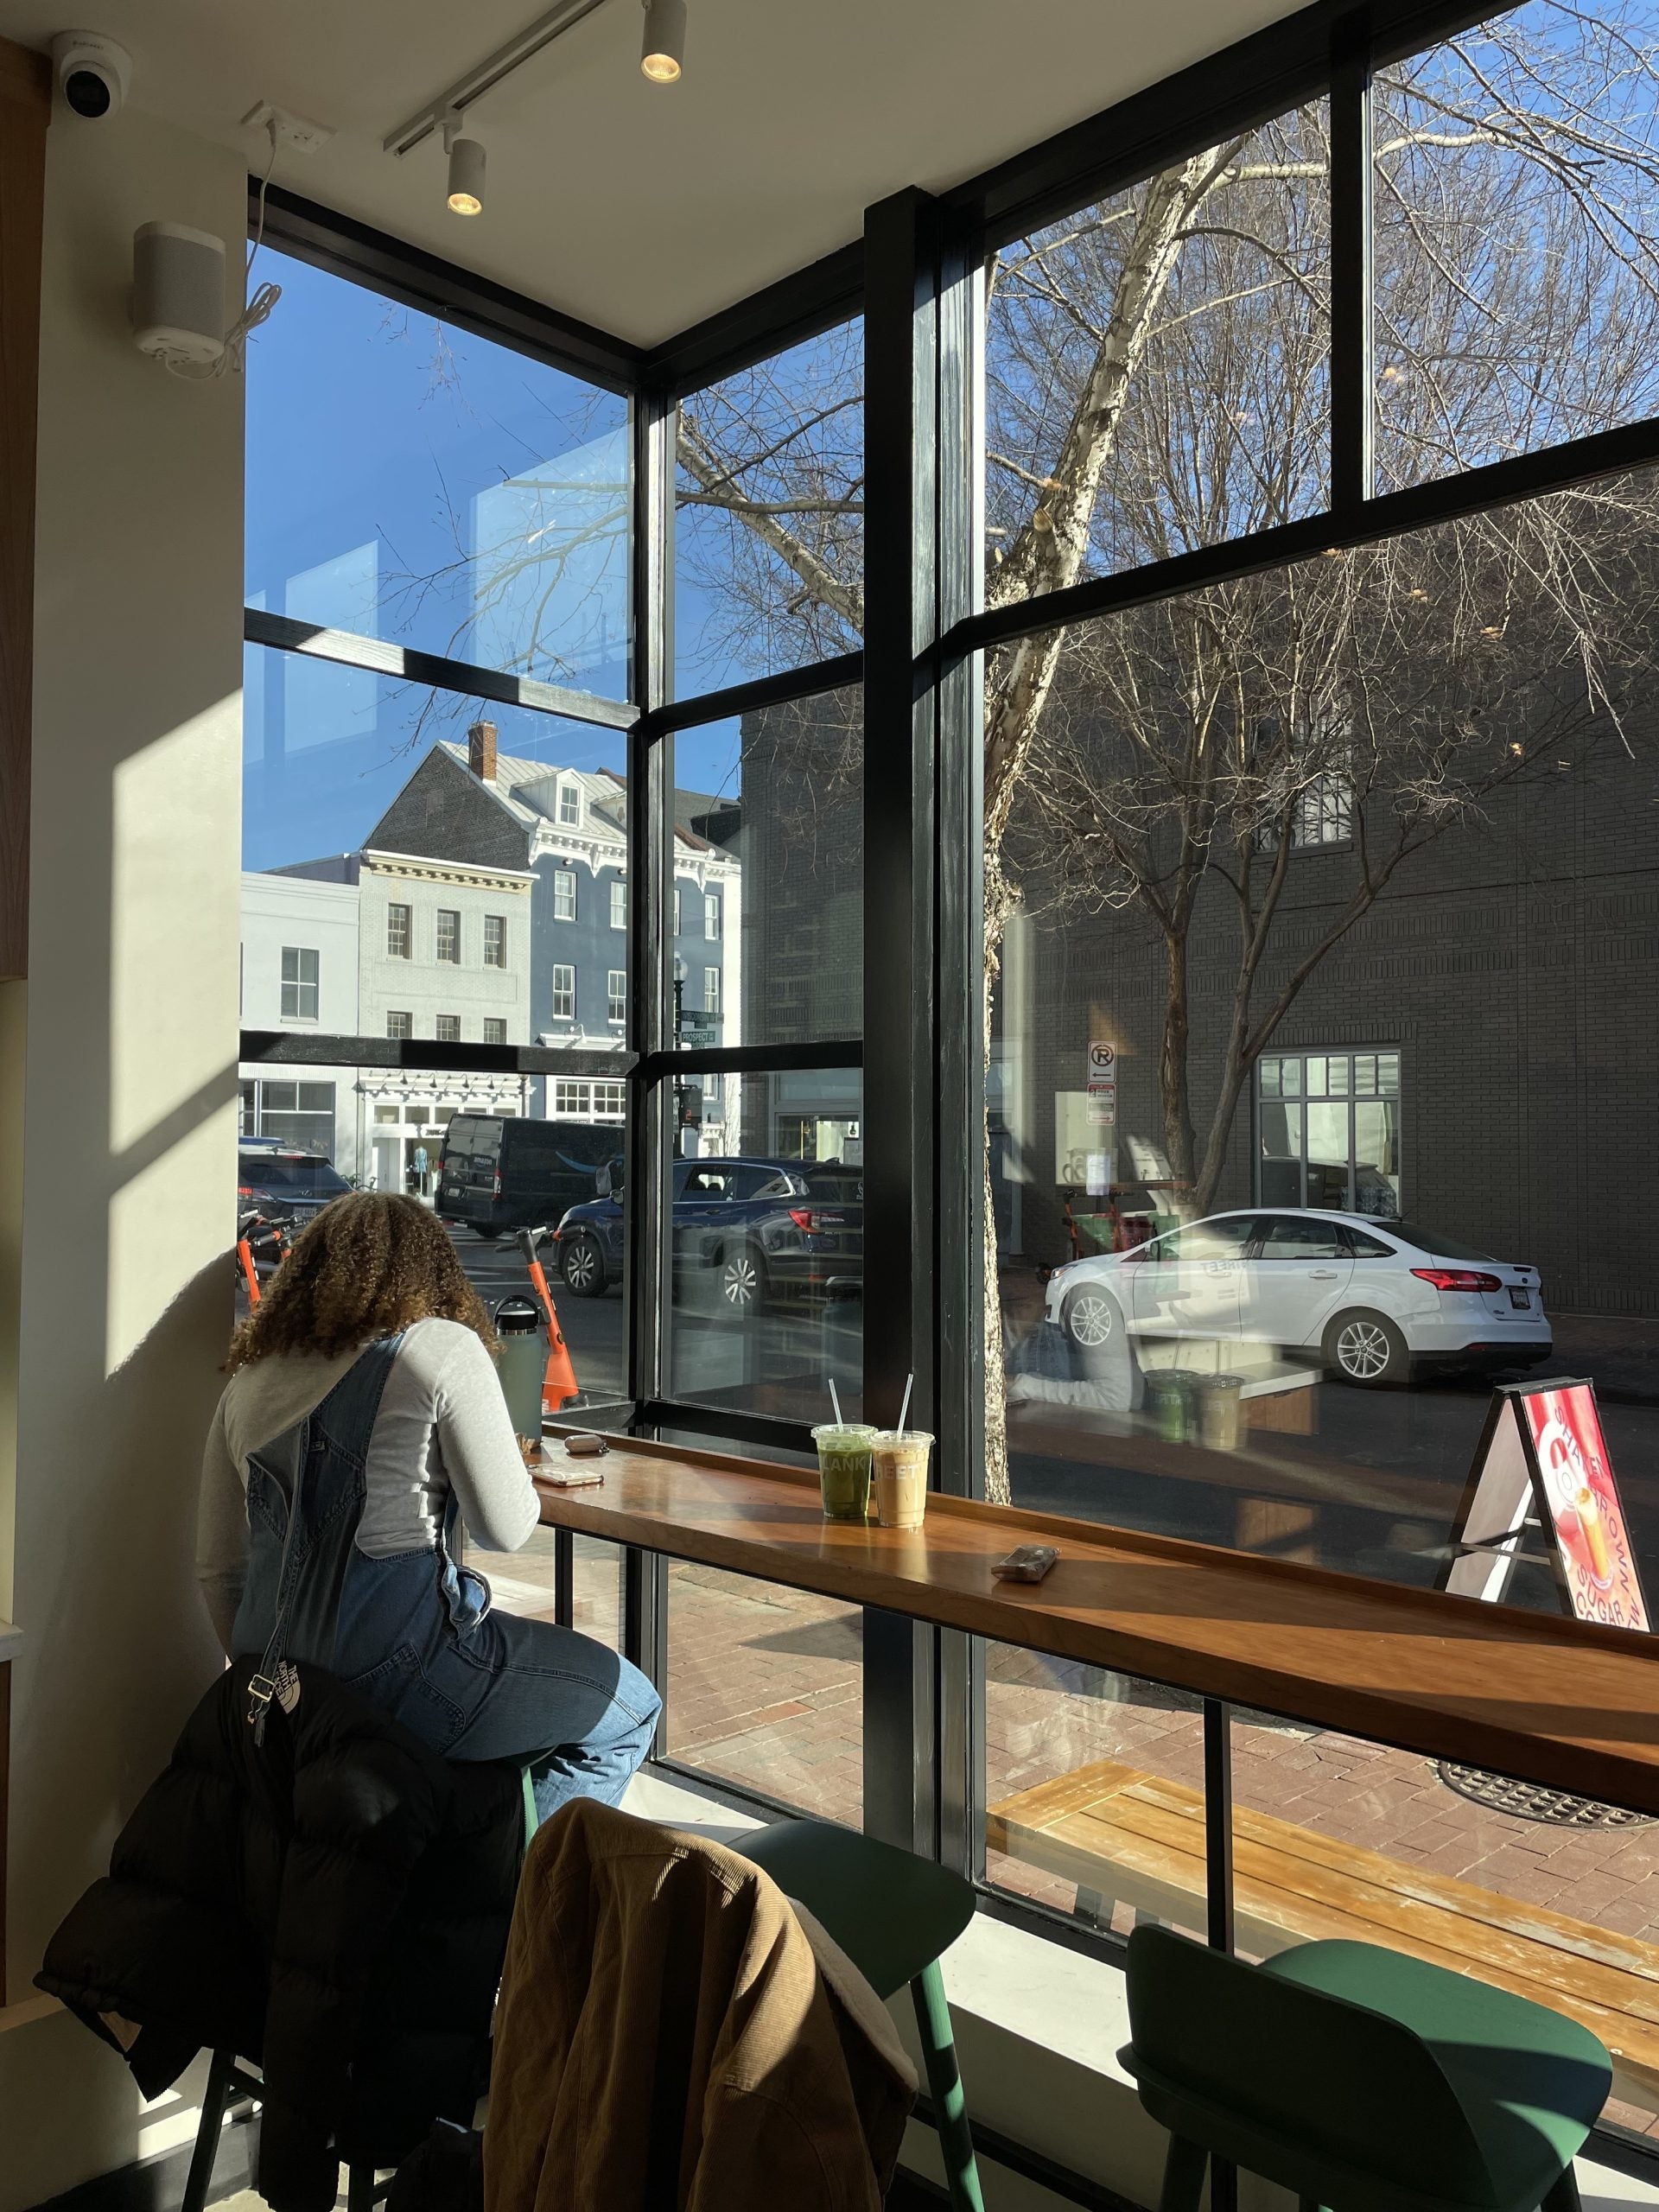 A girl sits at the window of a coffee shop, over looking Prospect Street and Wisconsin Avenue